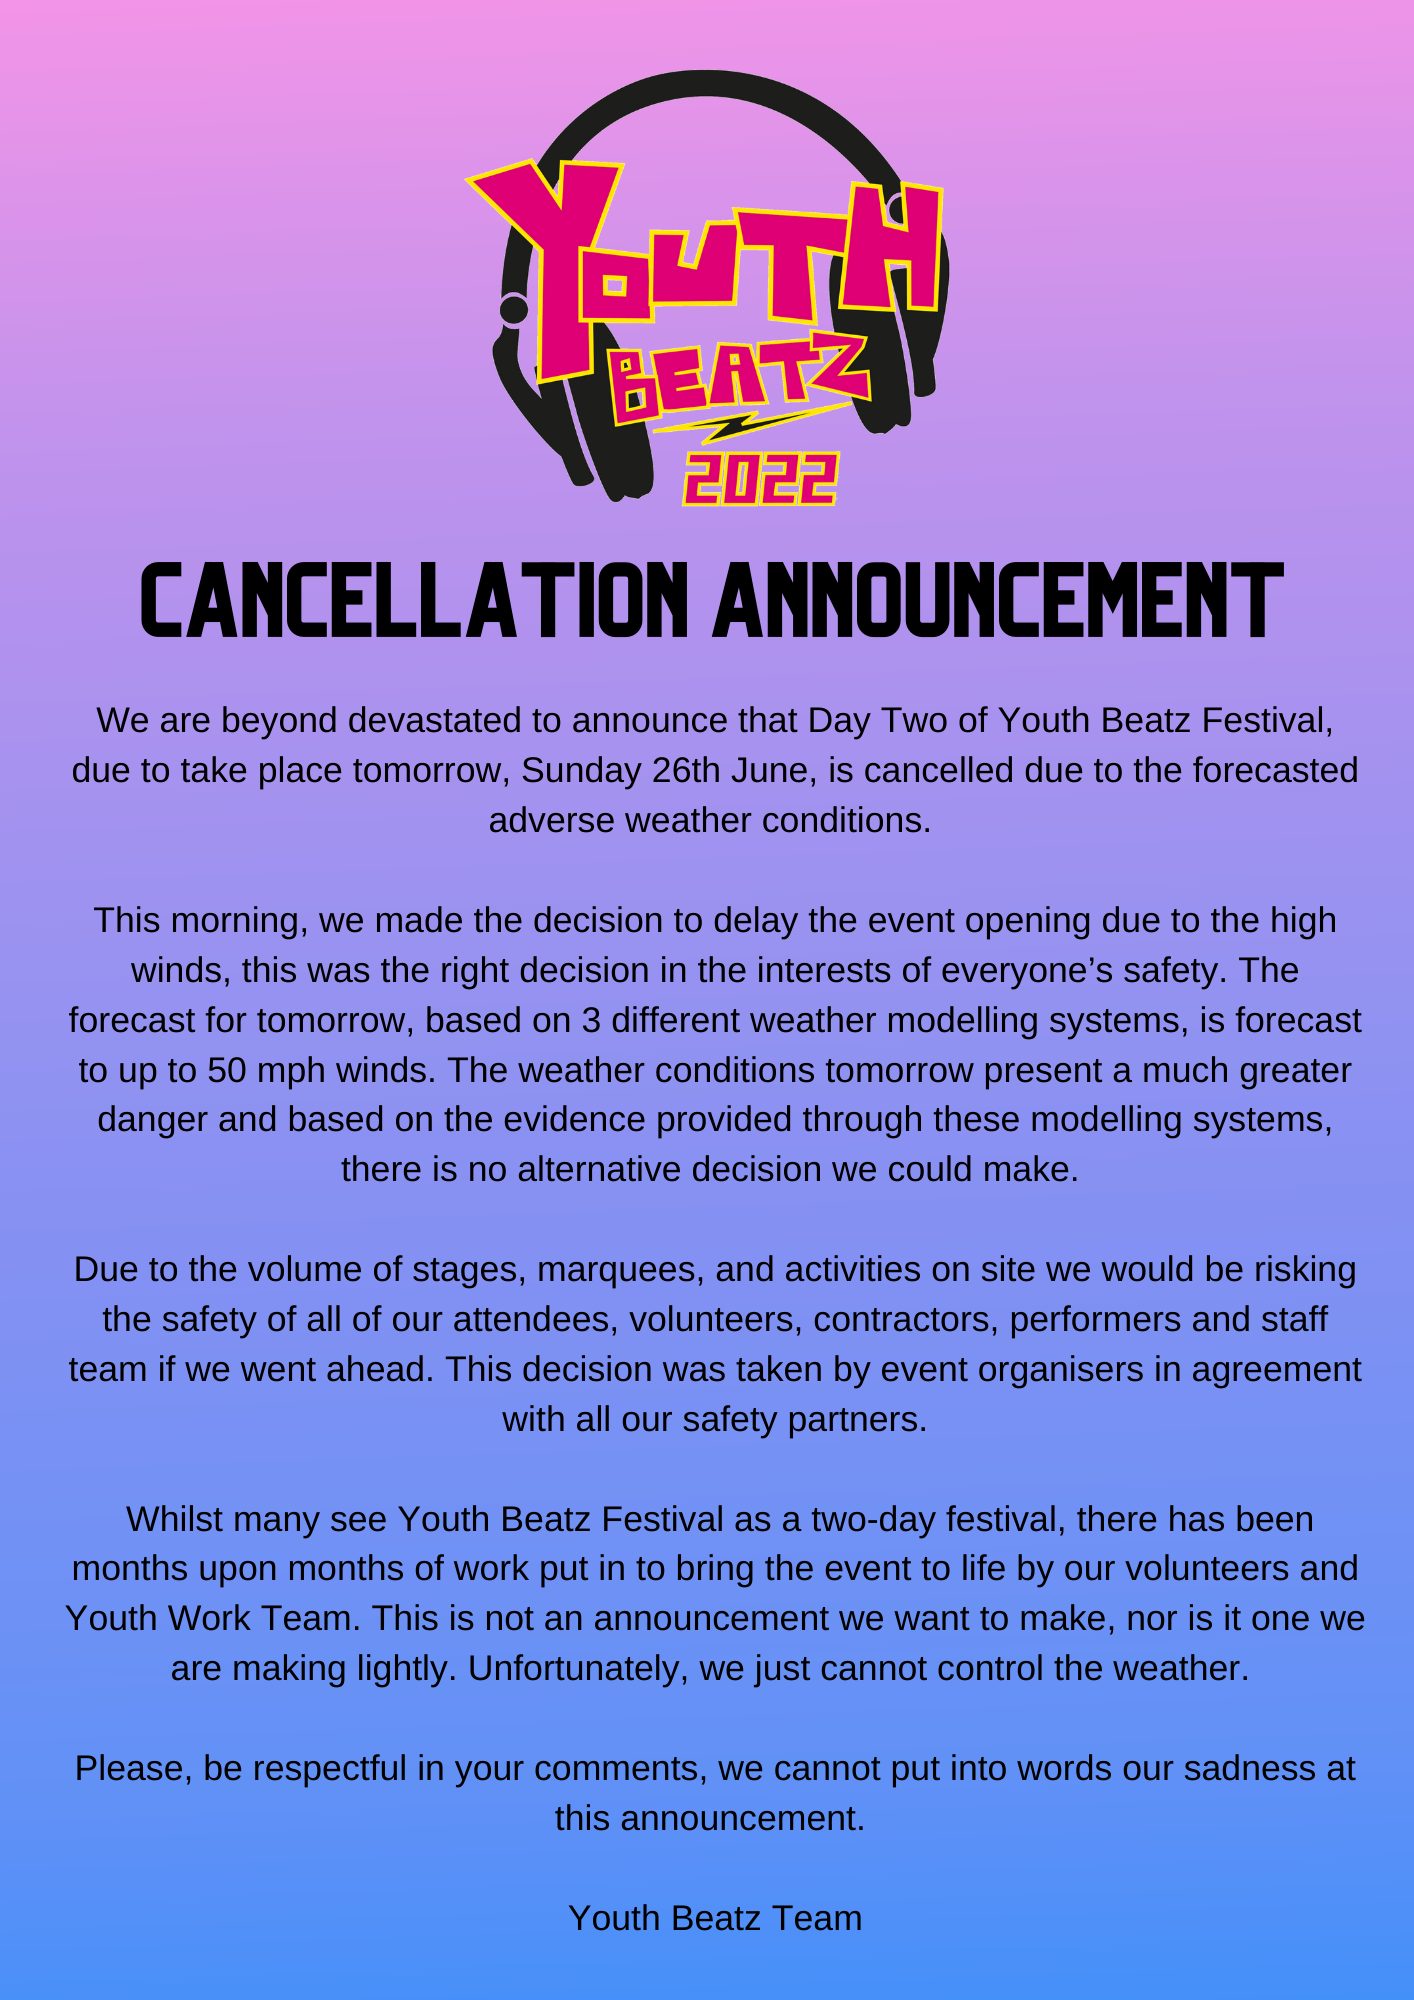 YOUTH BEATZ CANCEL DAY 2 DUE TO WEATHER FORECAST